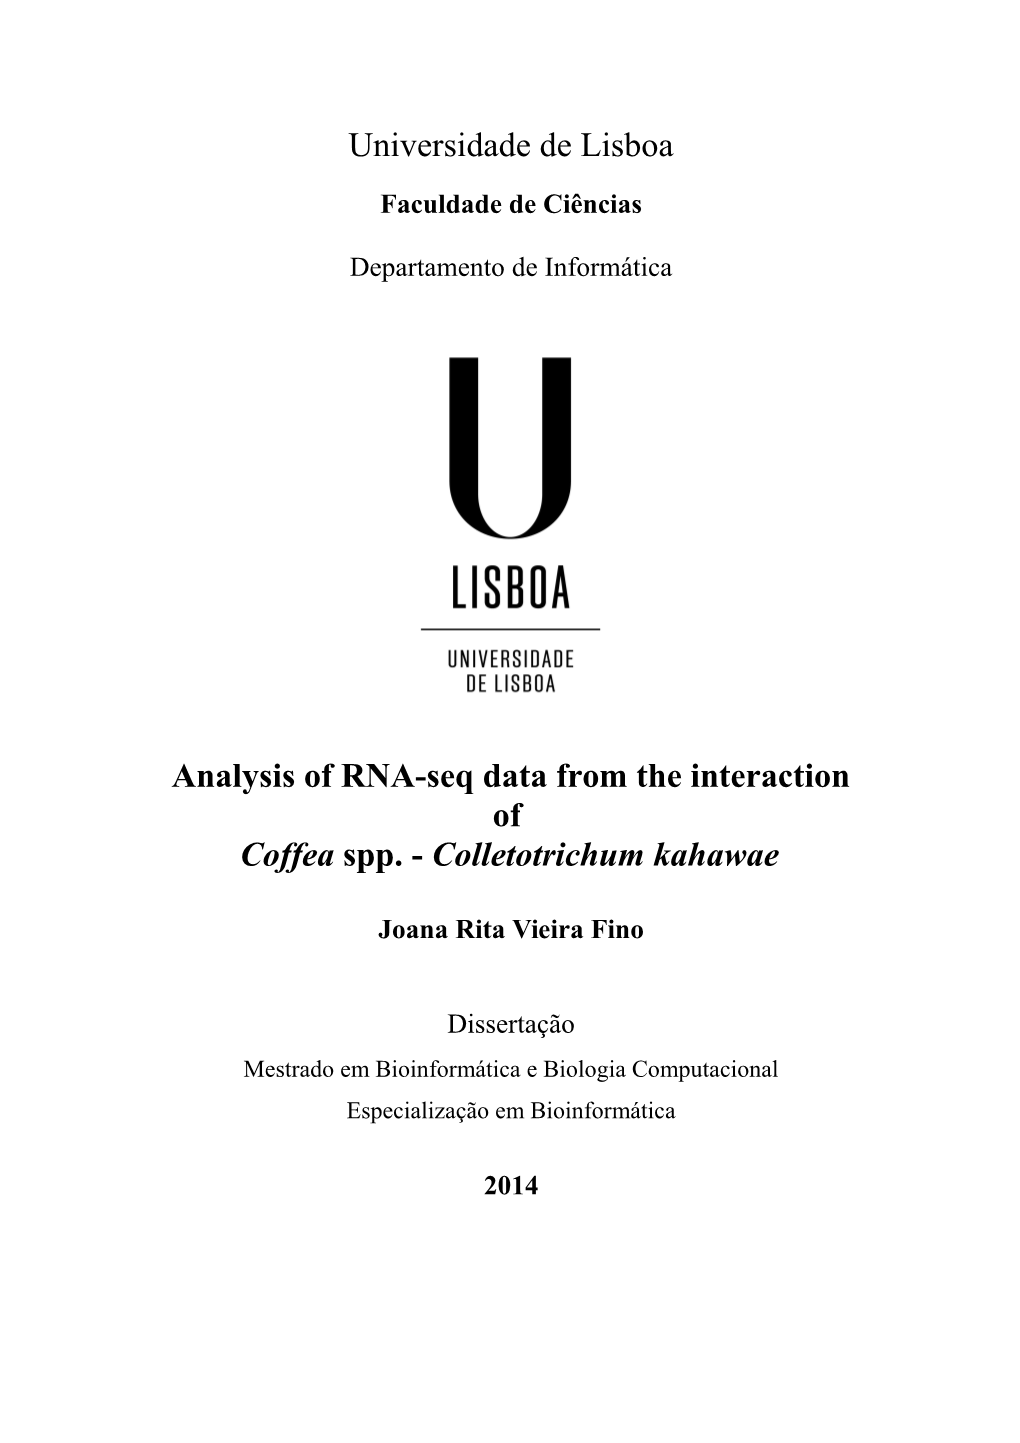 Analysis of RNA-Seq Data from the Interaction of Coffea Spp. - Colletotrichum Kahawae